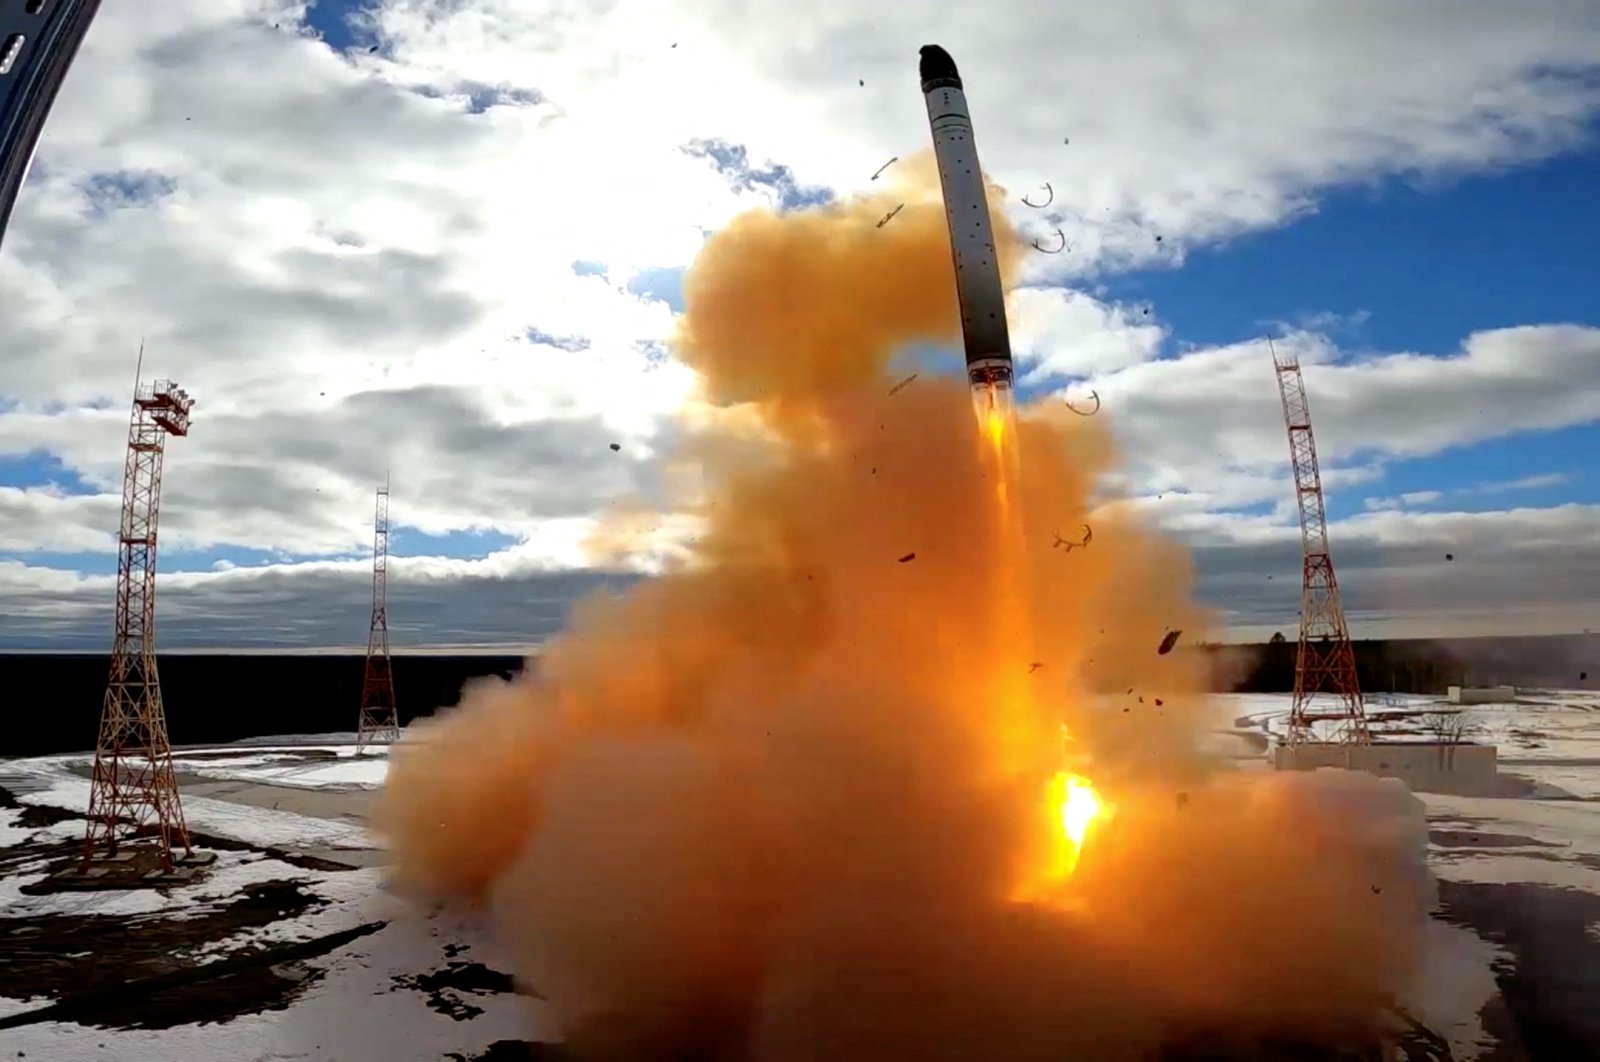 A Sarmat intercontinental ballistic missile is test-launched by the Russian military at the Plesetsk cosmodrome in Arkhangelsk region, Russia, in this still image taken from a video released April 20, 2022. (Reuters Photo)